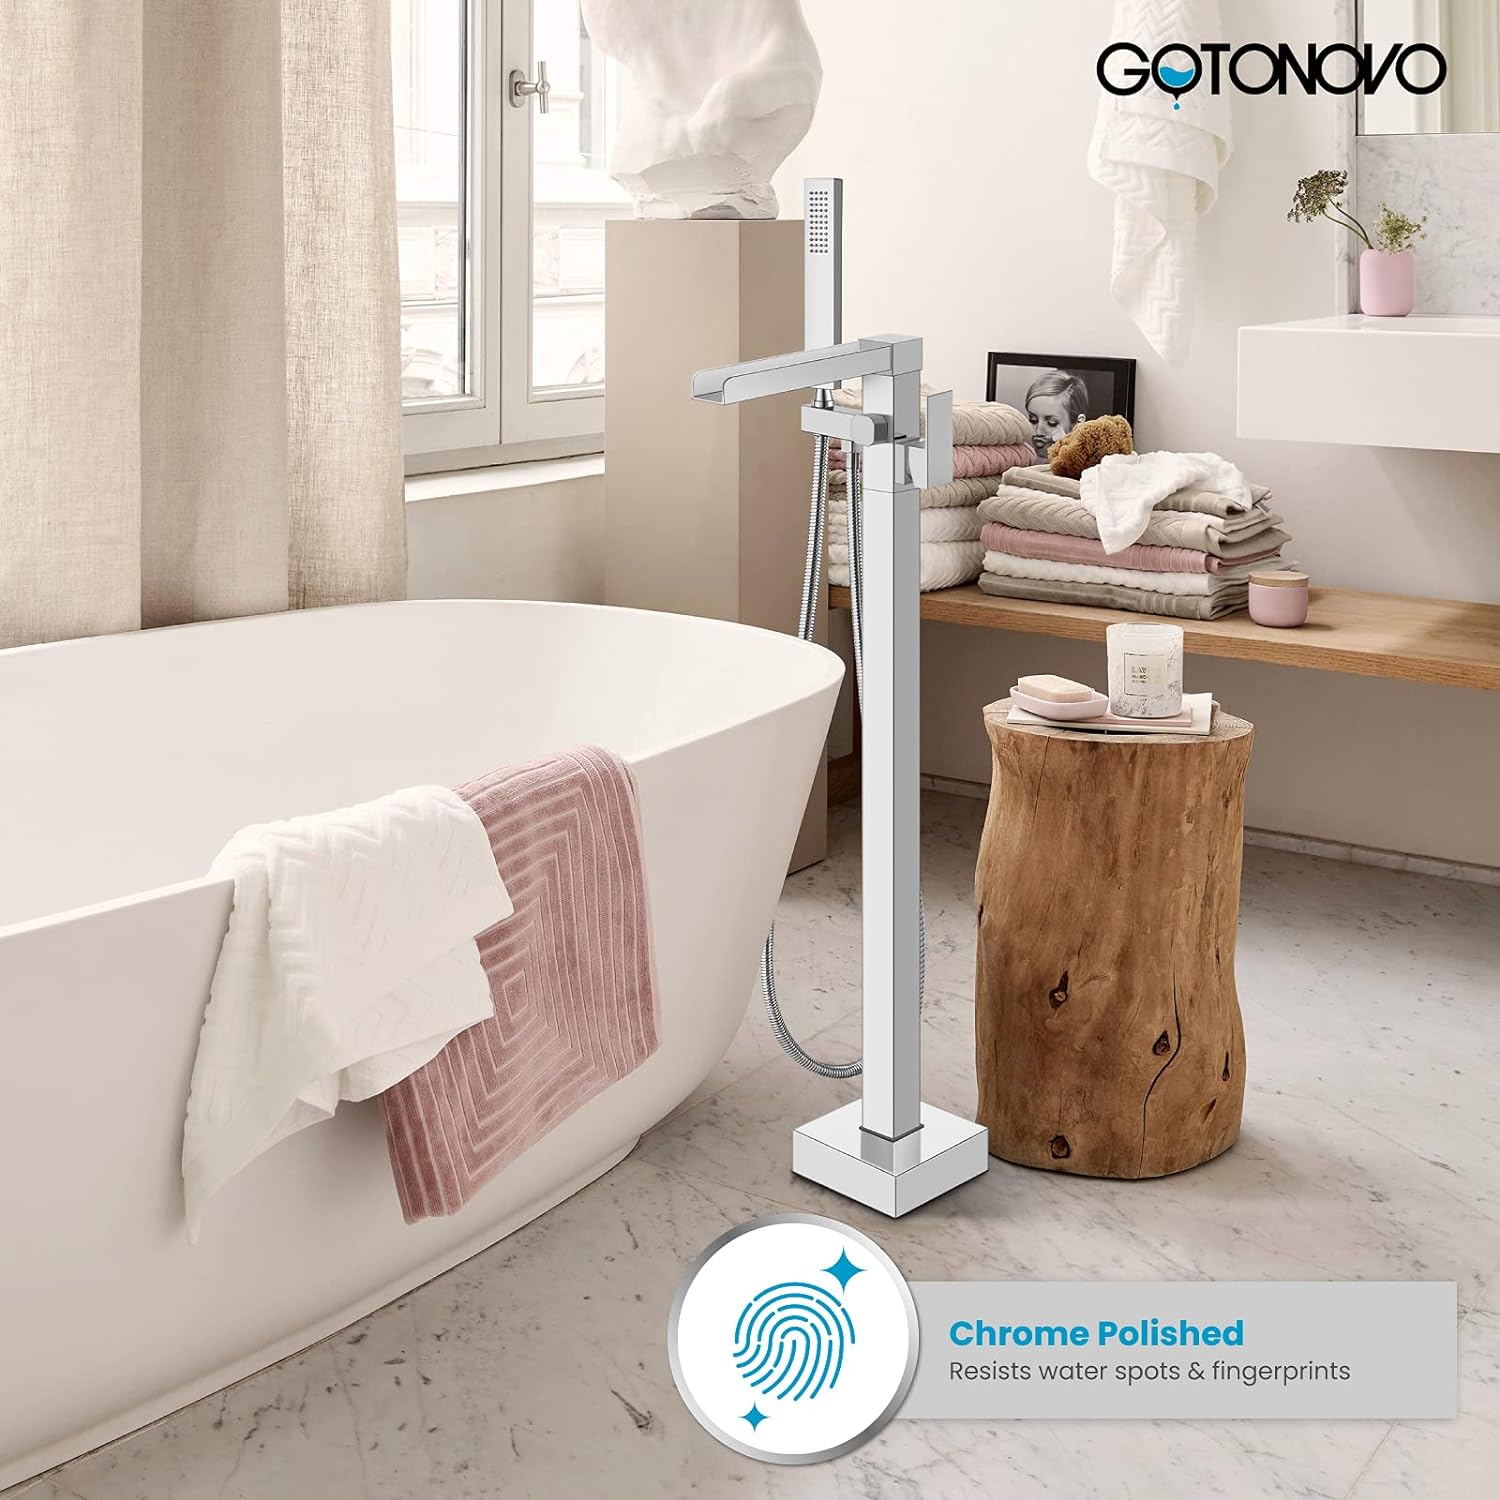 gotonovo Waterfall Freestanding Bathtub Faucet Floor Mount Tub Filler Chrome Polished Single Handle Brass Tap with Hand Shower and 360 Degree Swivel Spout